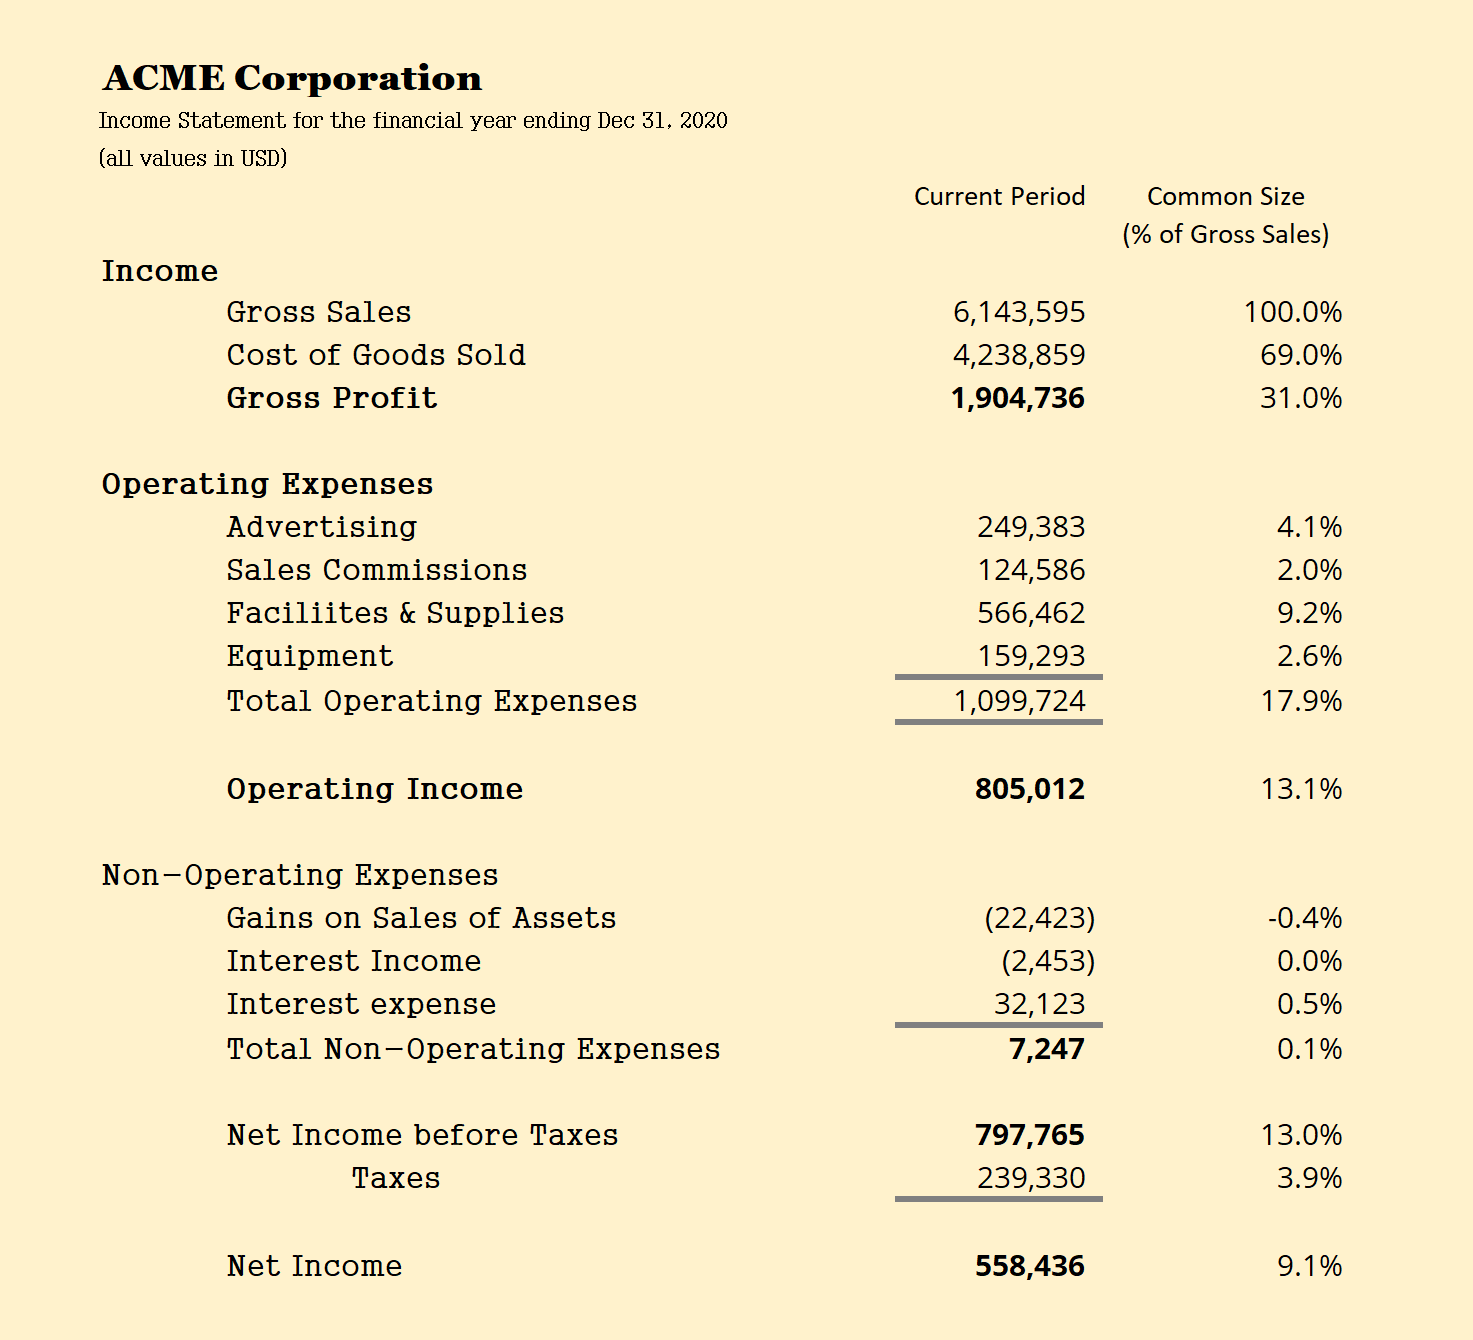 presentation of income statement that provides several intermediate profit measures